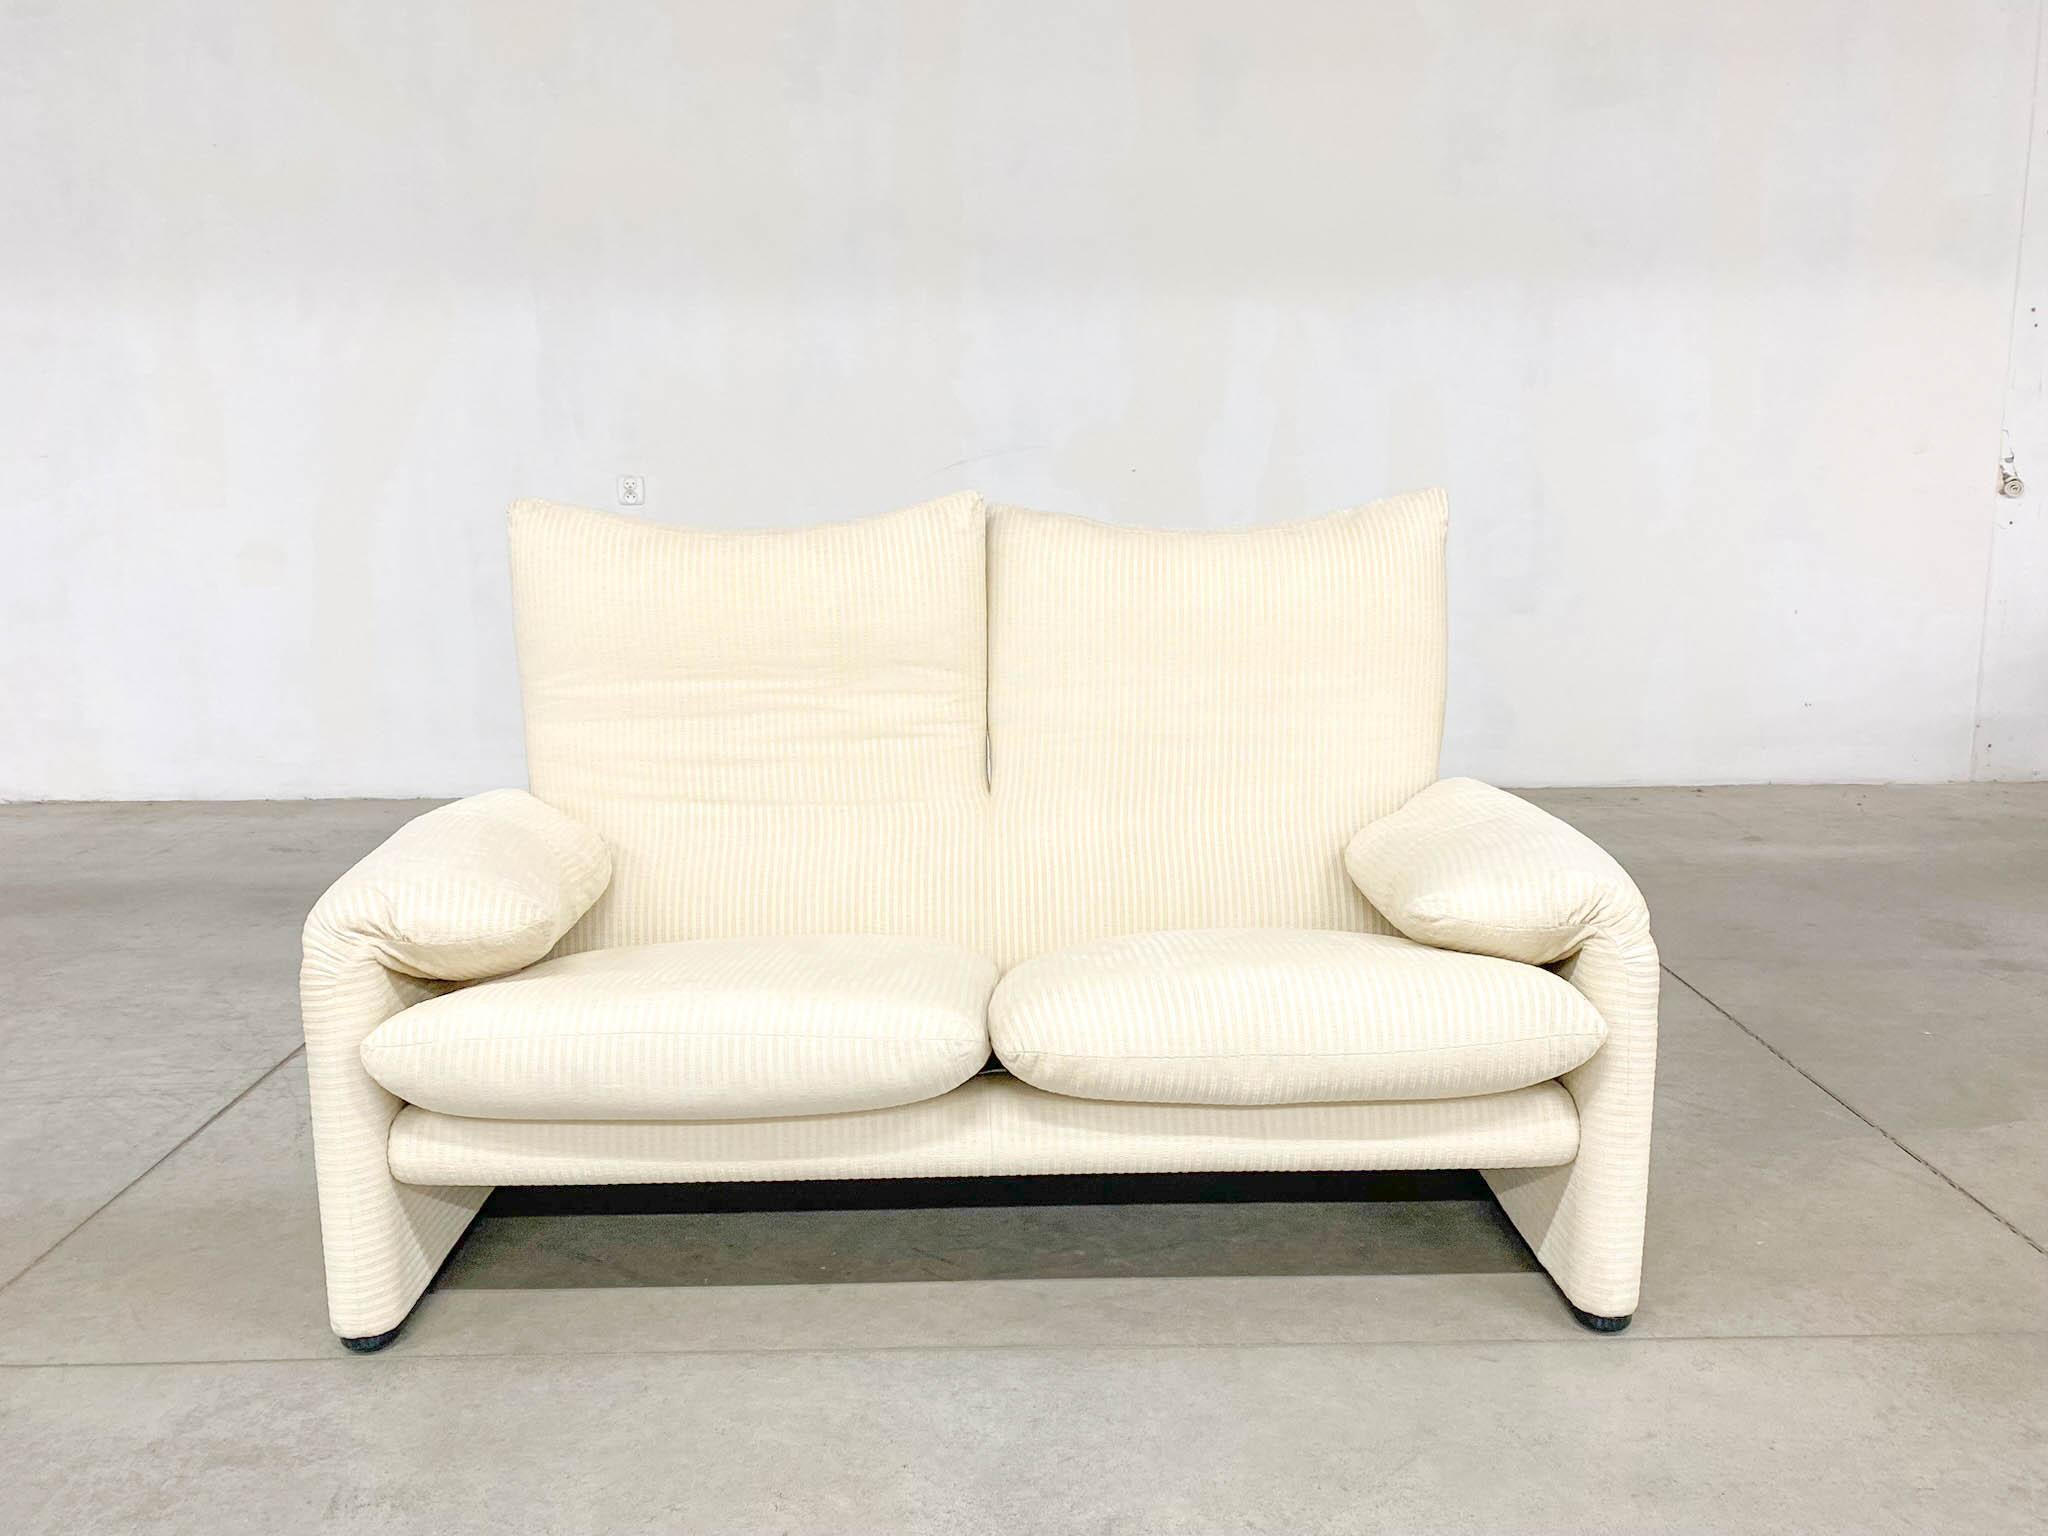 Discover the international bestseller – Maralunga Sofa. With its inviting shapes and unique characteristic feature, the Maralunga series is a testament to innovation and comfort. Engineered by Cassina, the avant-garde mechanism of the Maralunga sofa